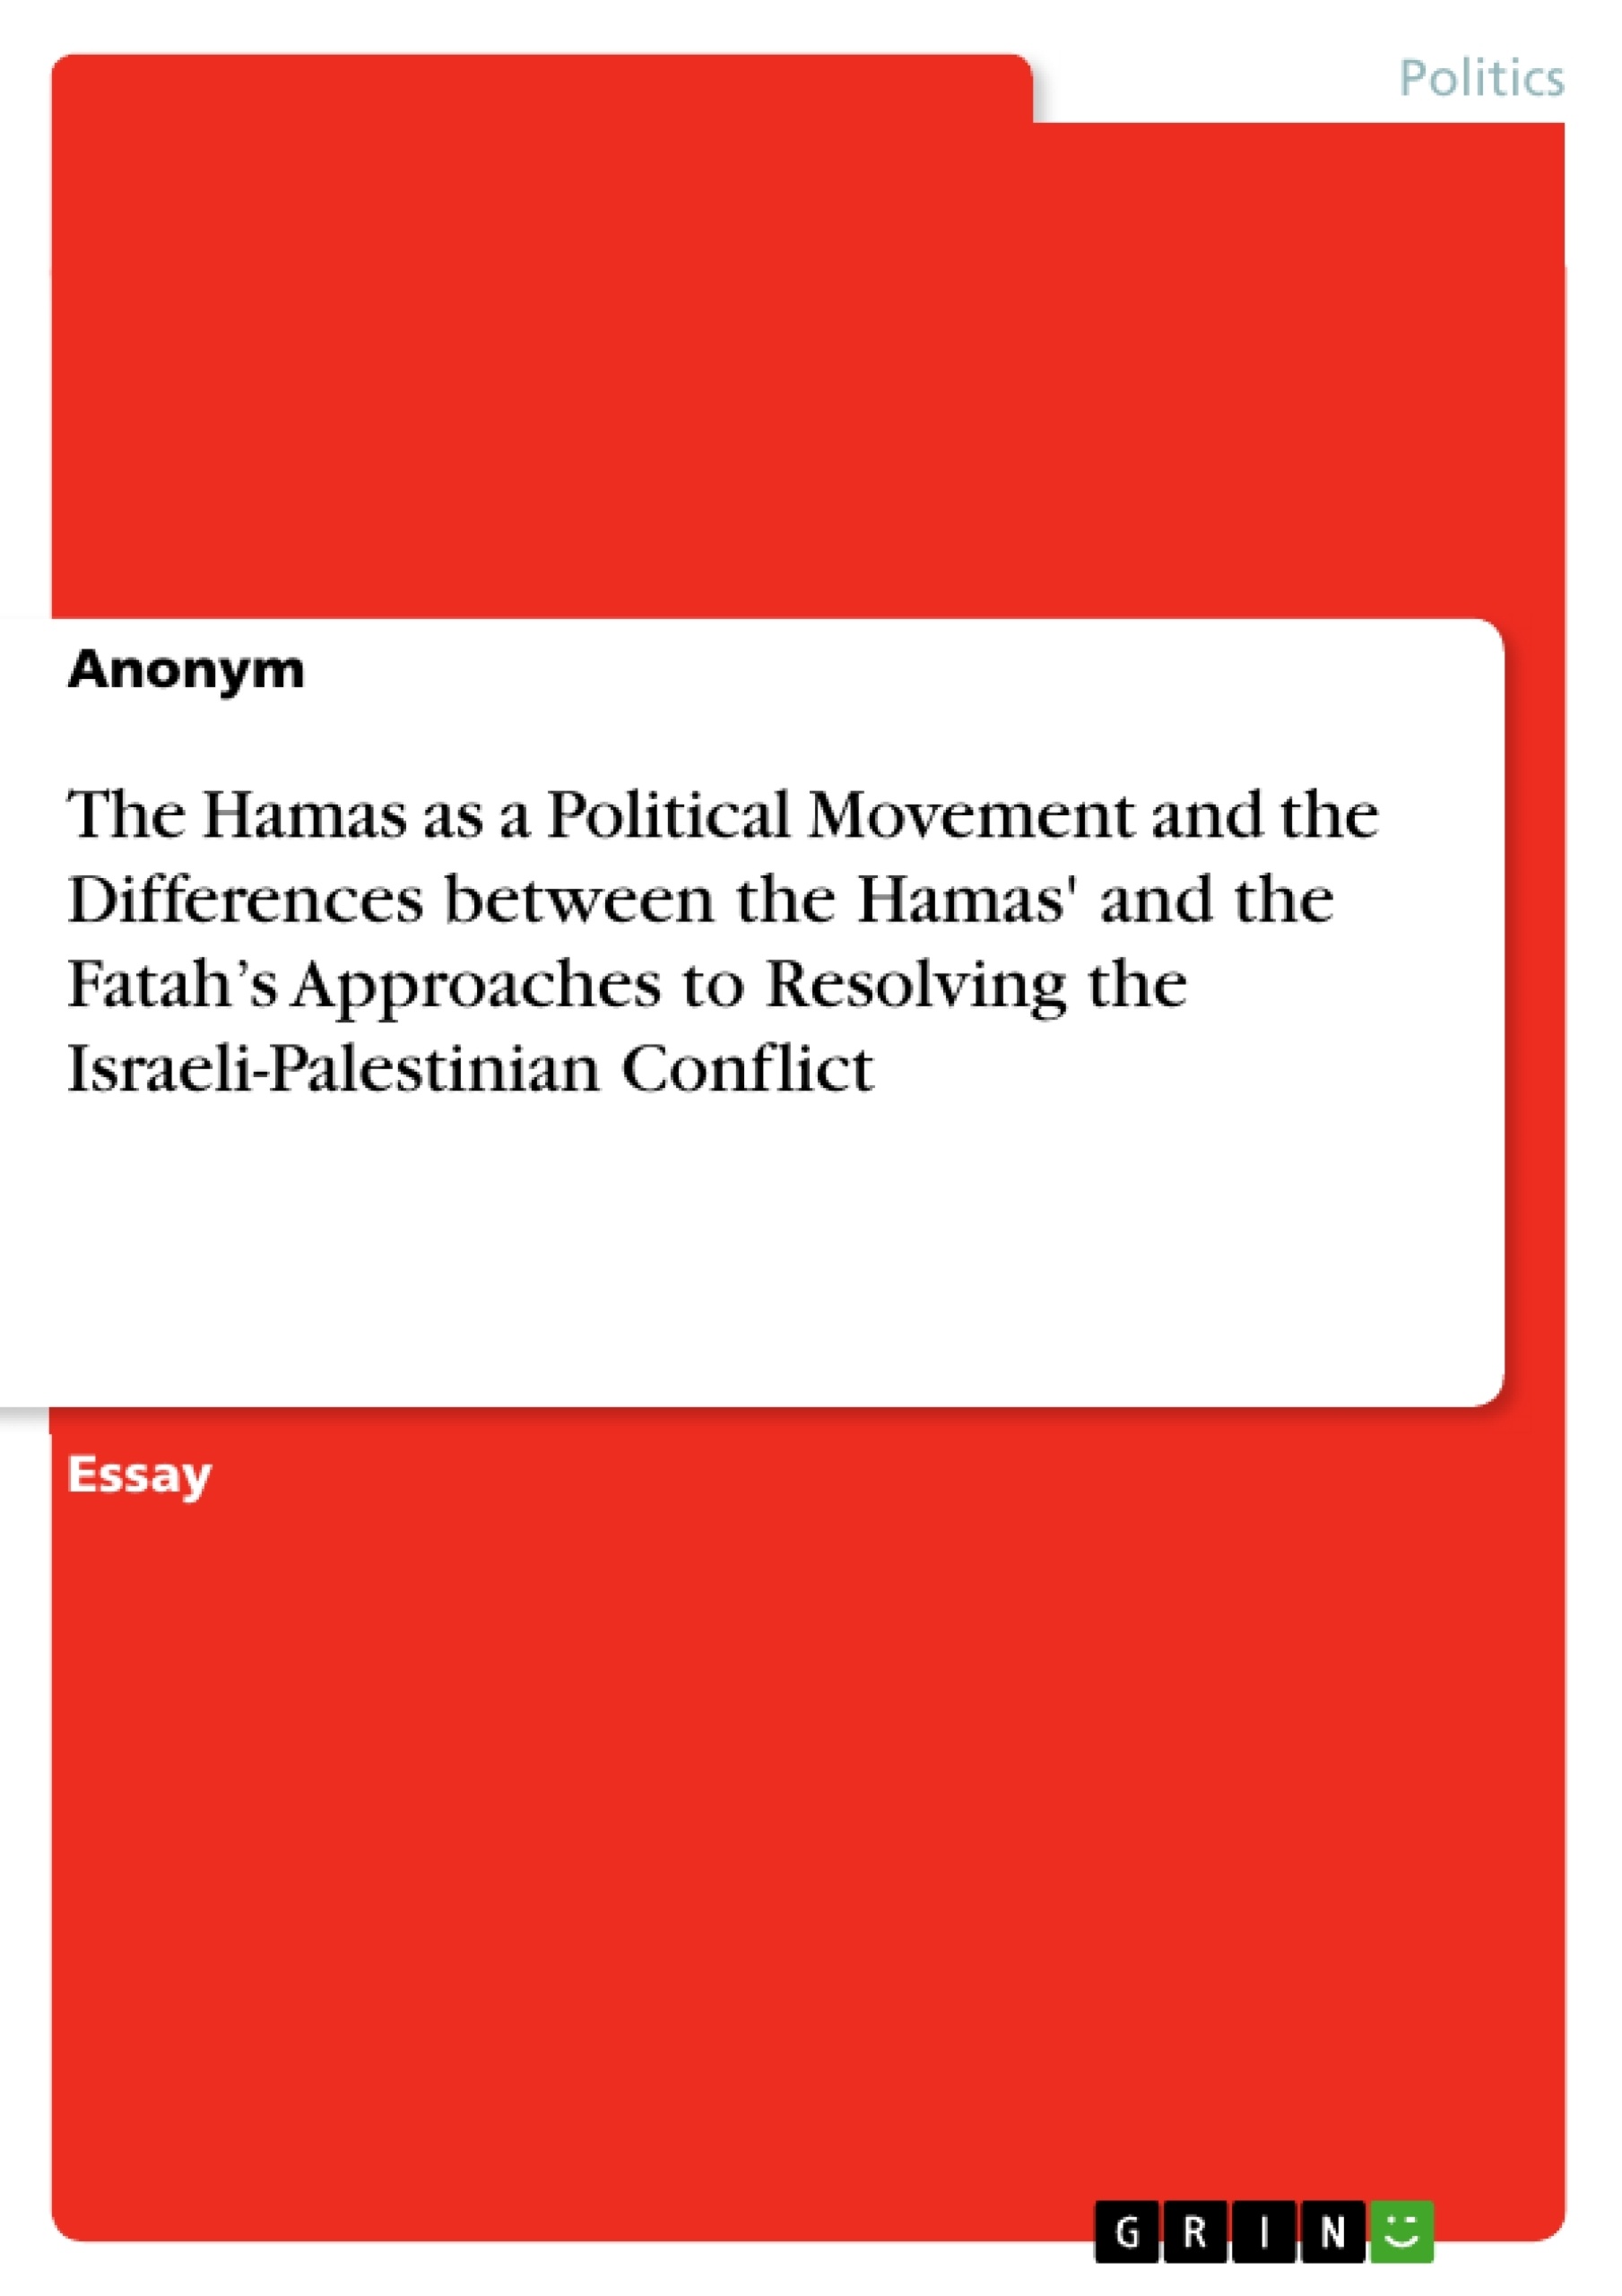 Titre: The Hamas as a Political Movement and the Differences between the Hamas' and the Fatah’s Approaches to Resolving the Israeli-Palestinian Conflict